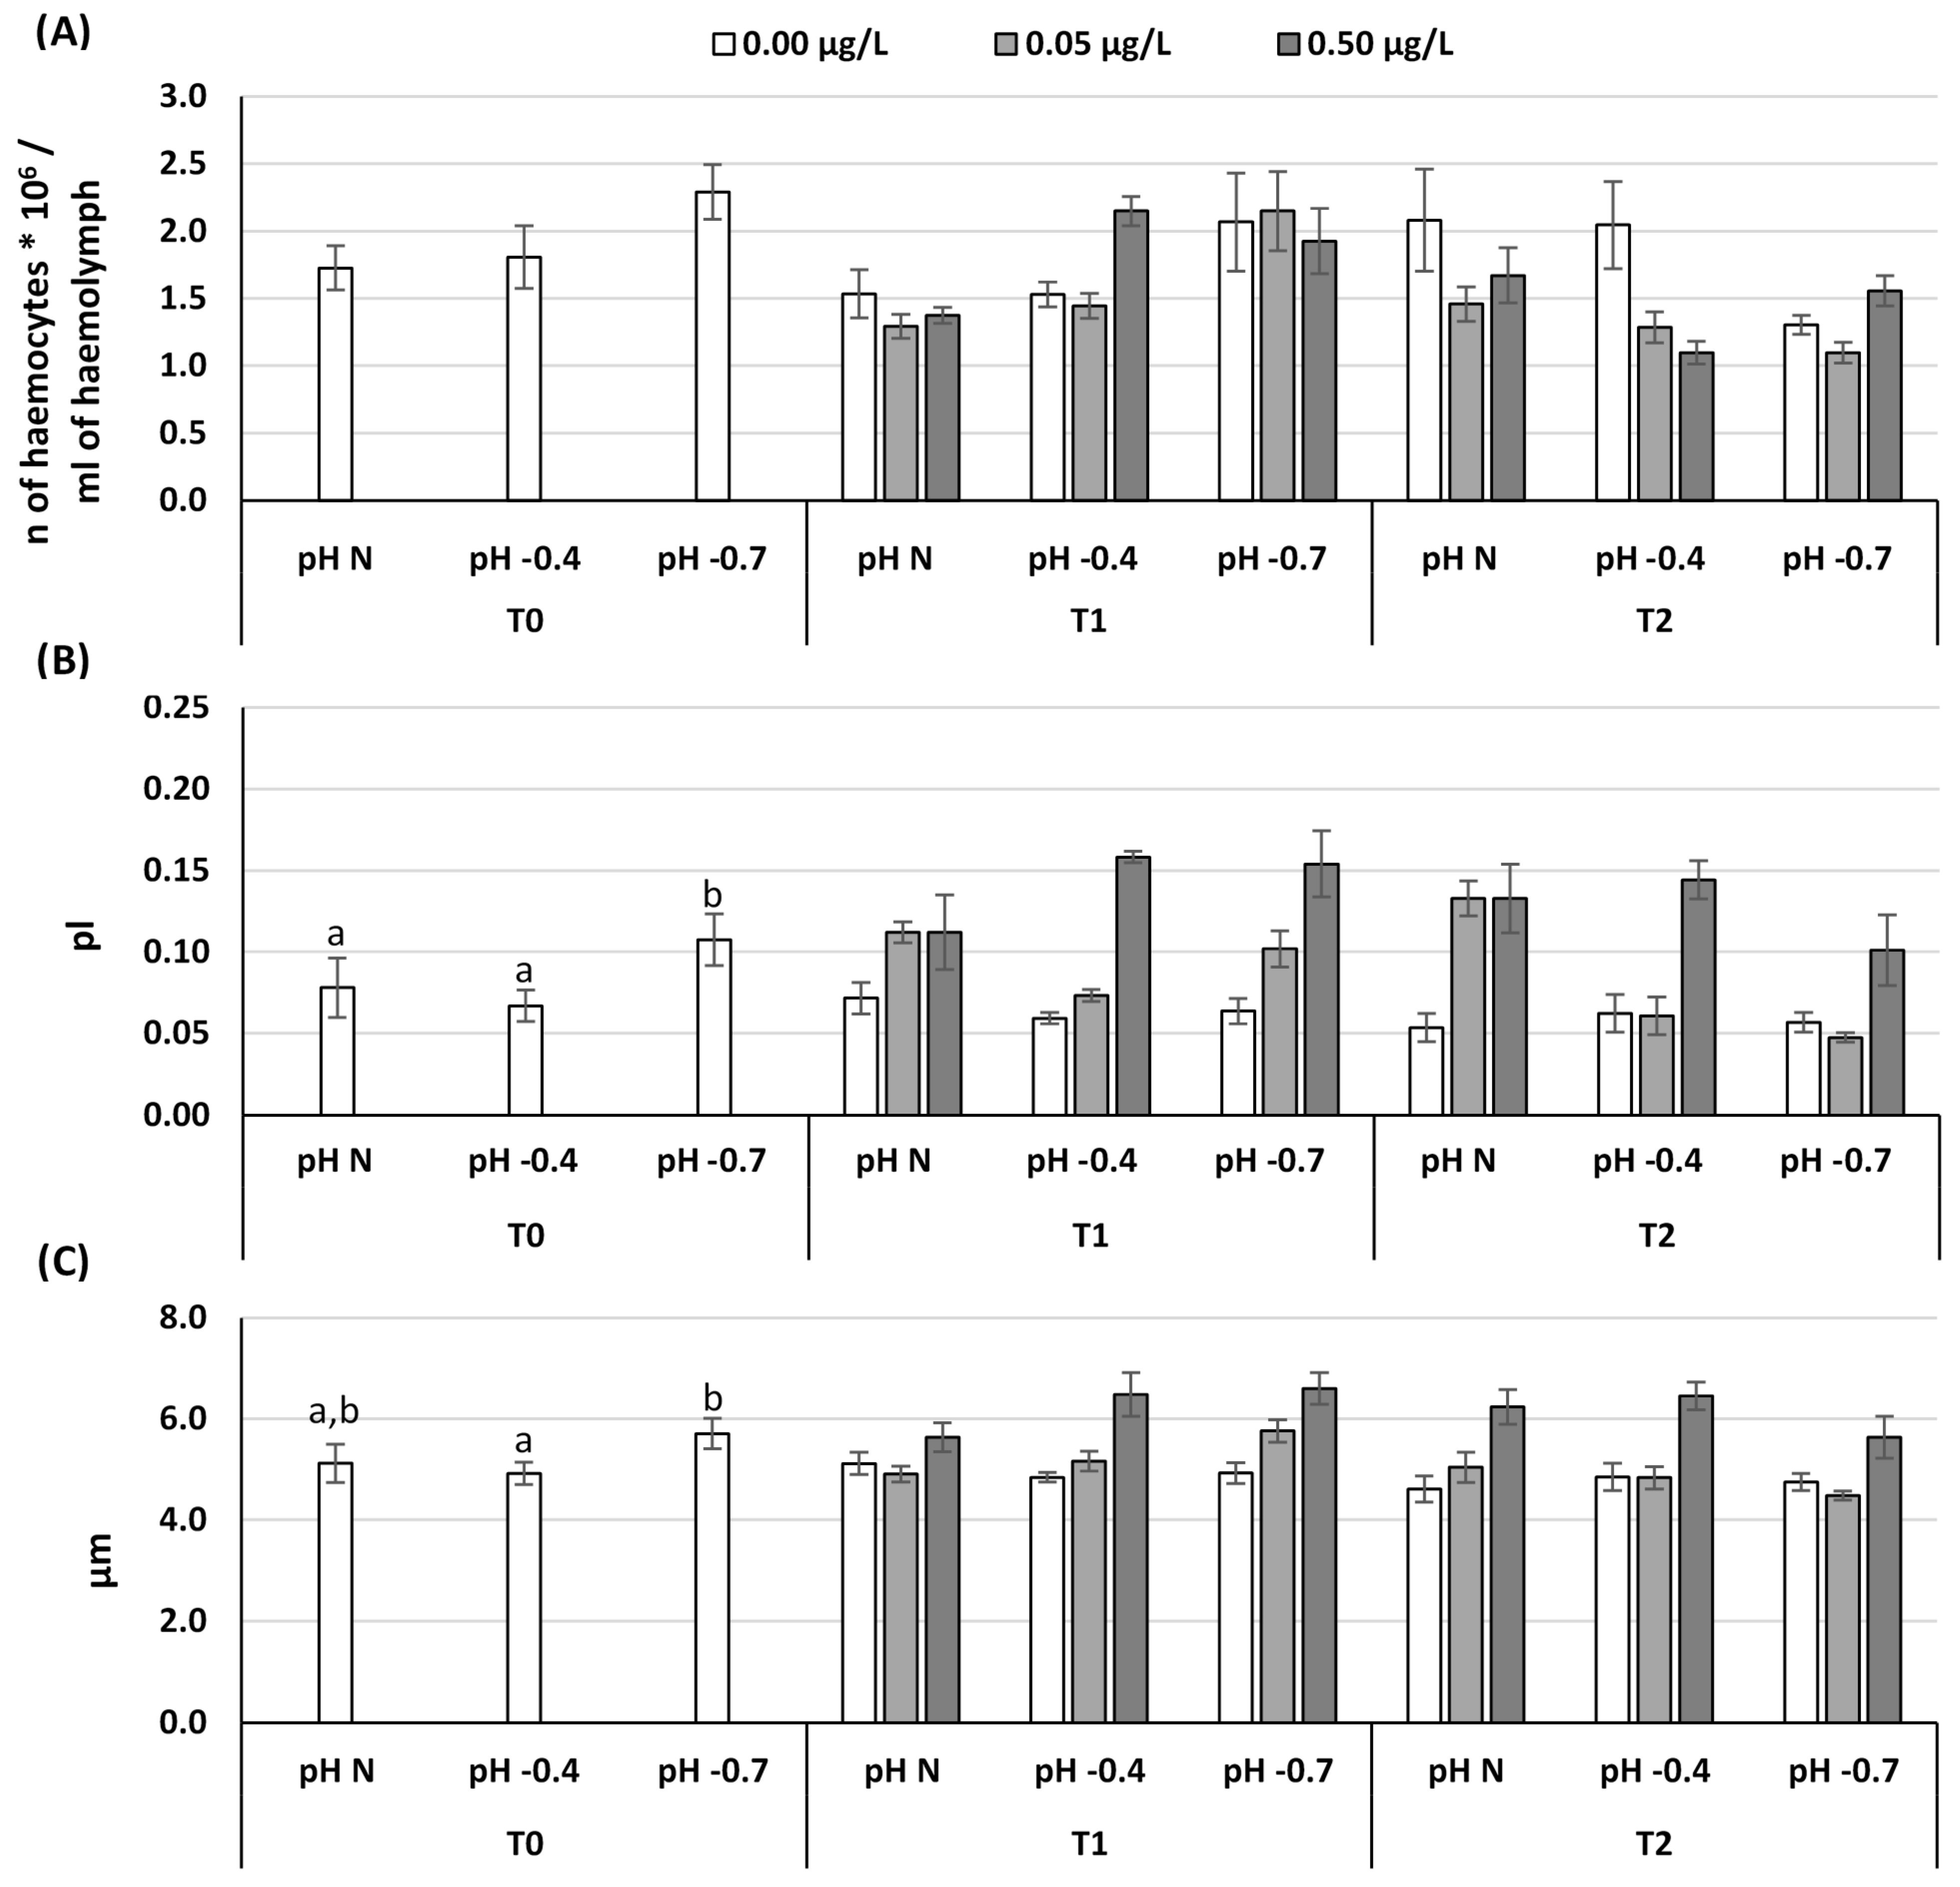 JMSE | Free Full-Text | Exposure to Decreased pH and Caffeine Affects  Hemocyte Parameters in the Mussel Mytilus galloprovincialis